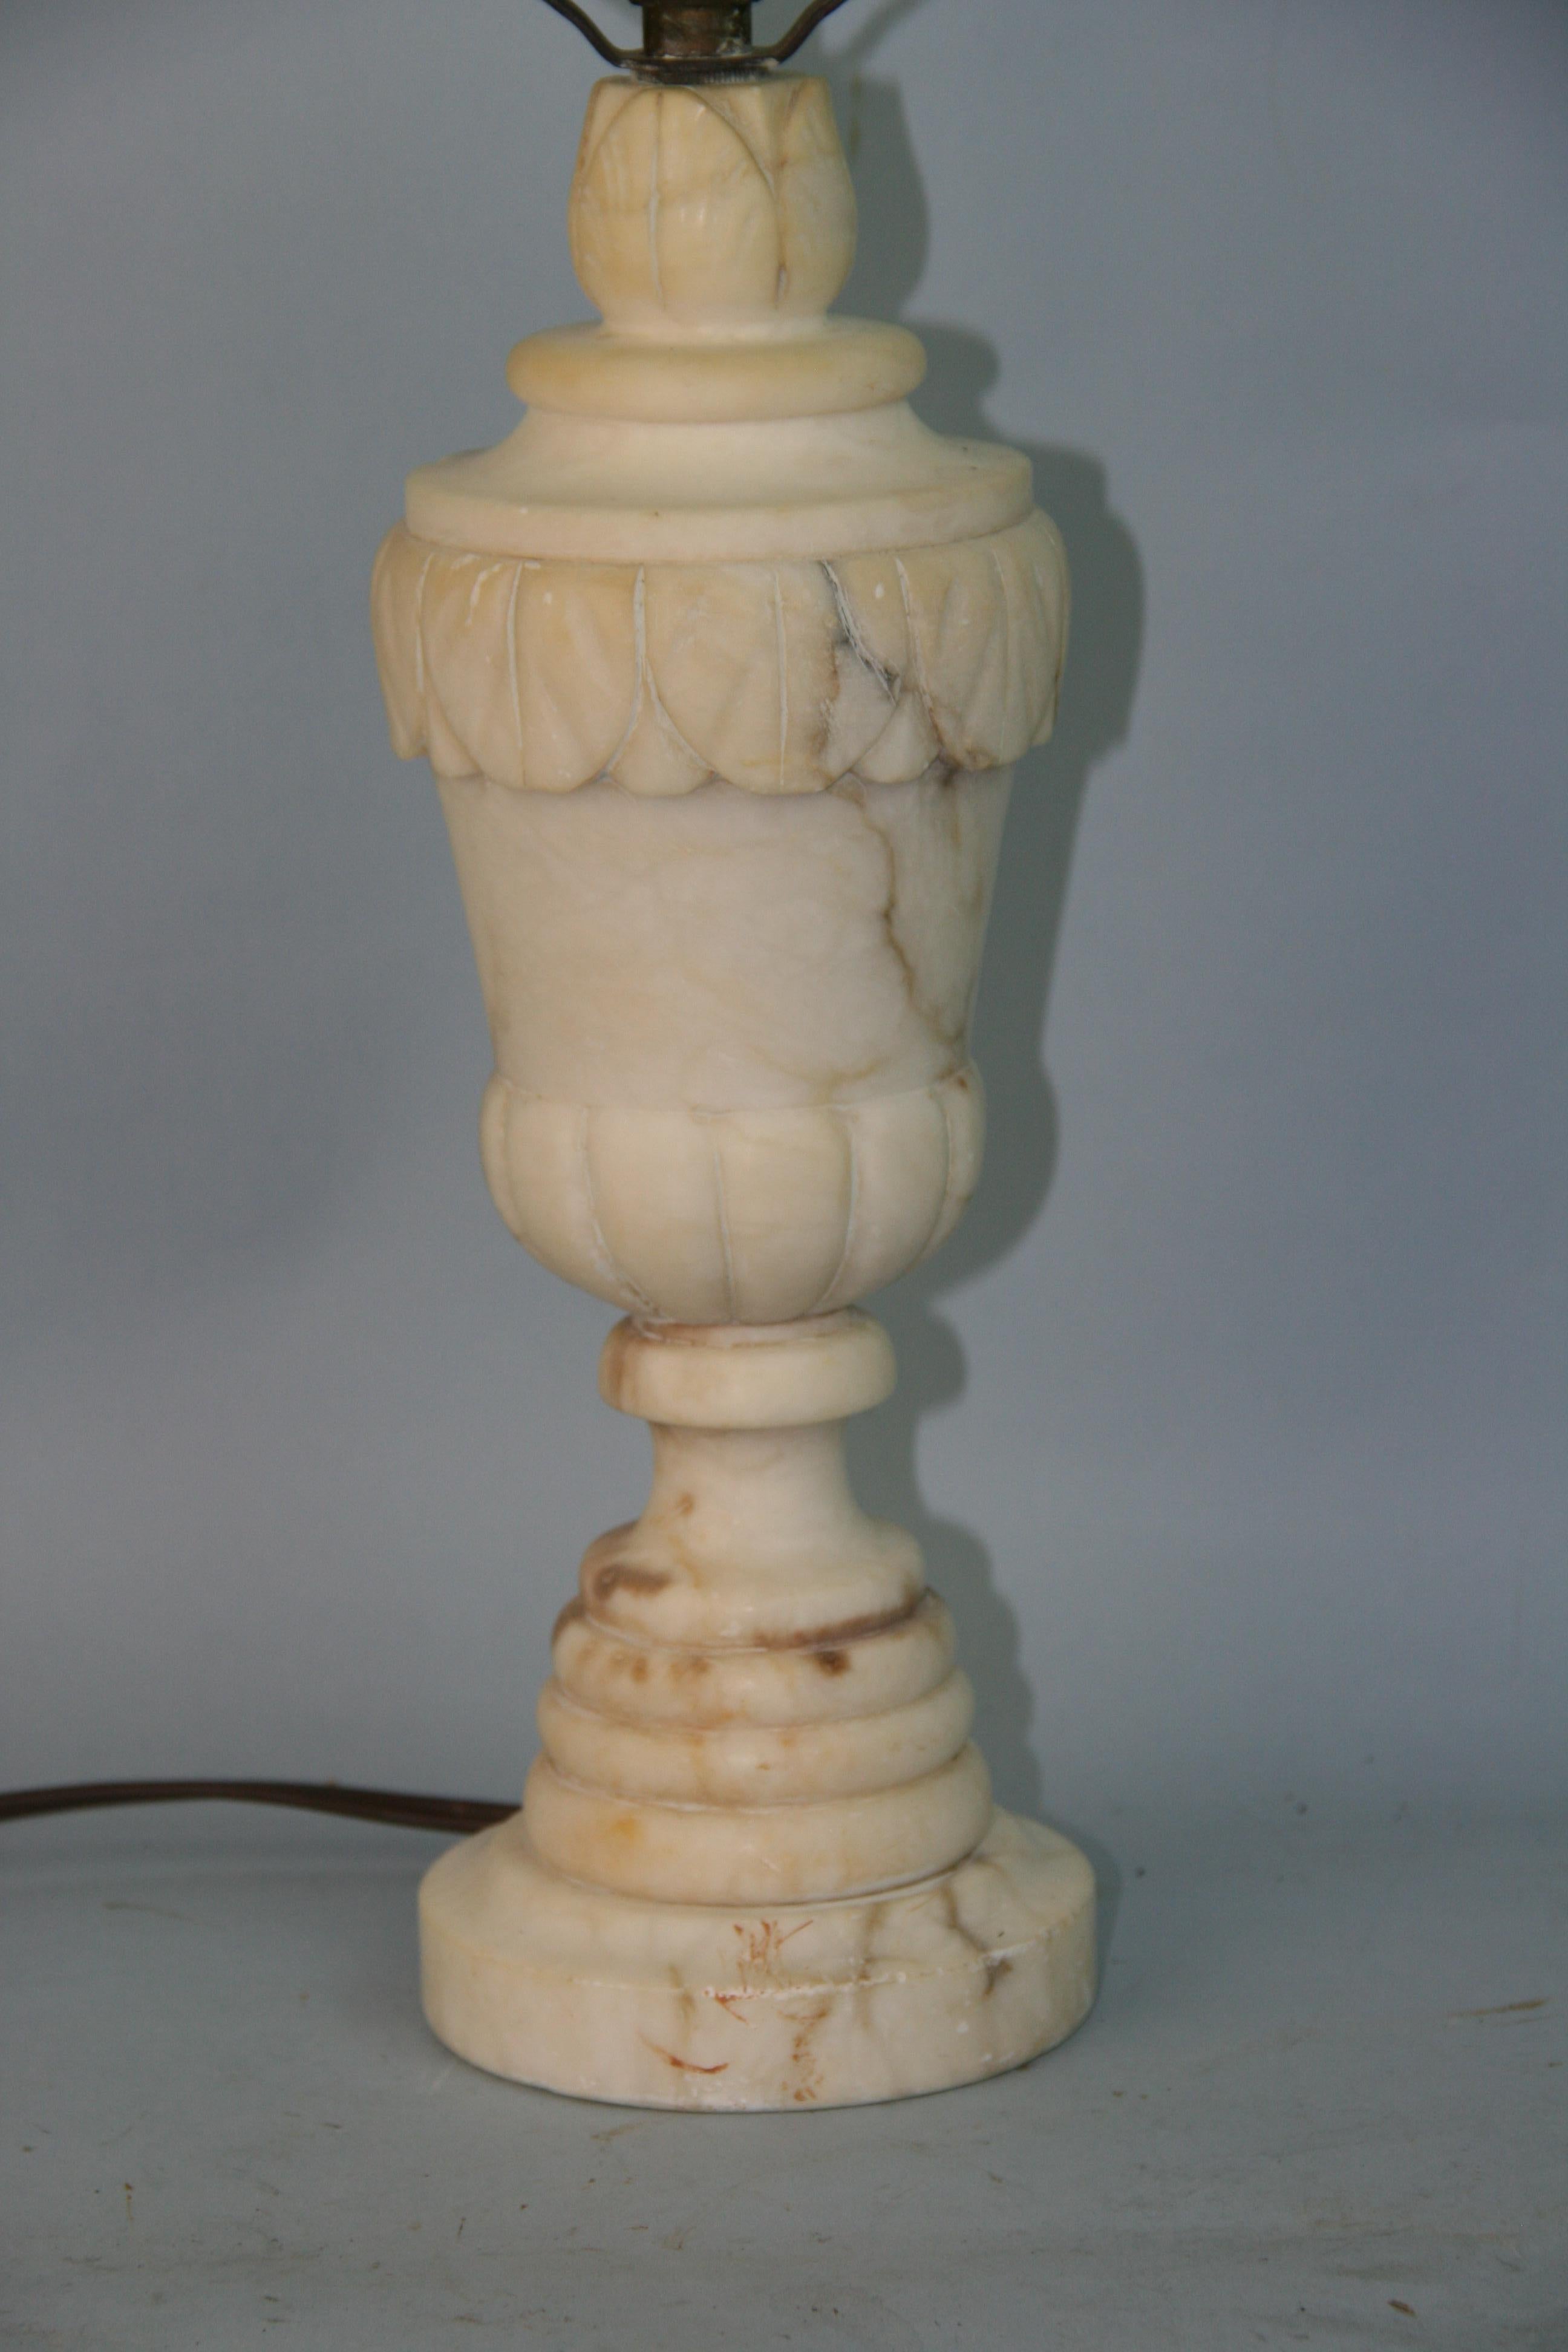 1268 hand carved alabaster table lamp
Measures: 12' to top of socket 
20.5